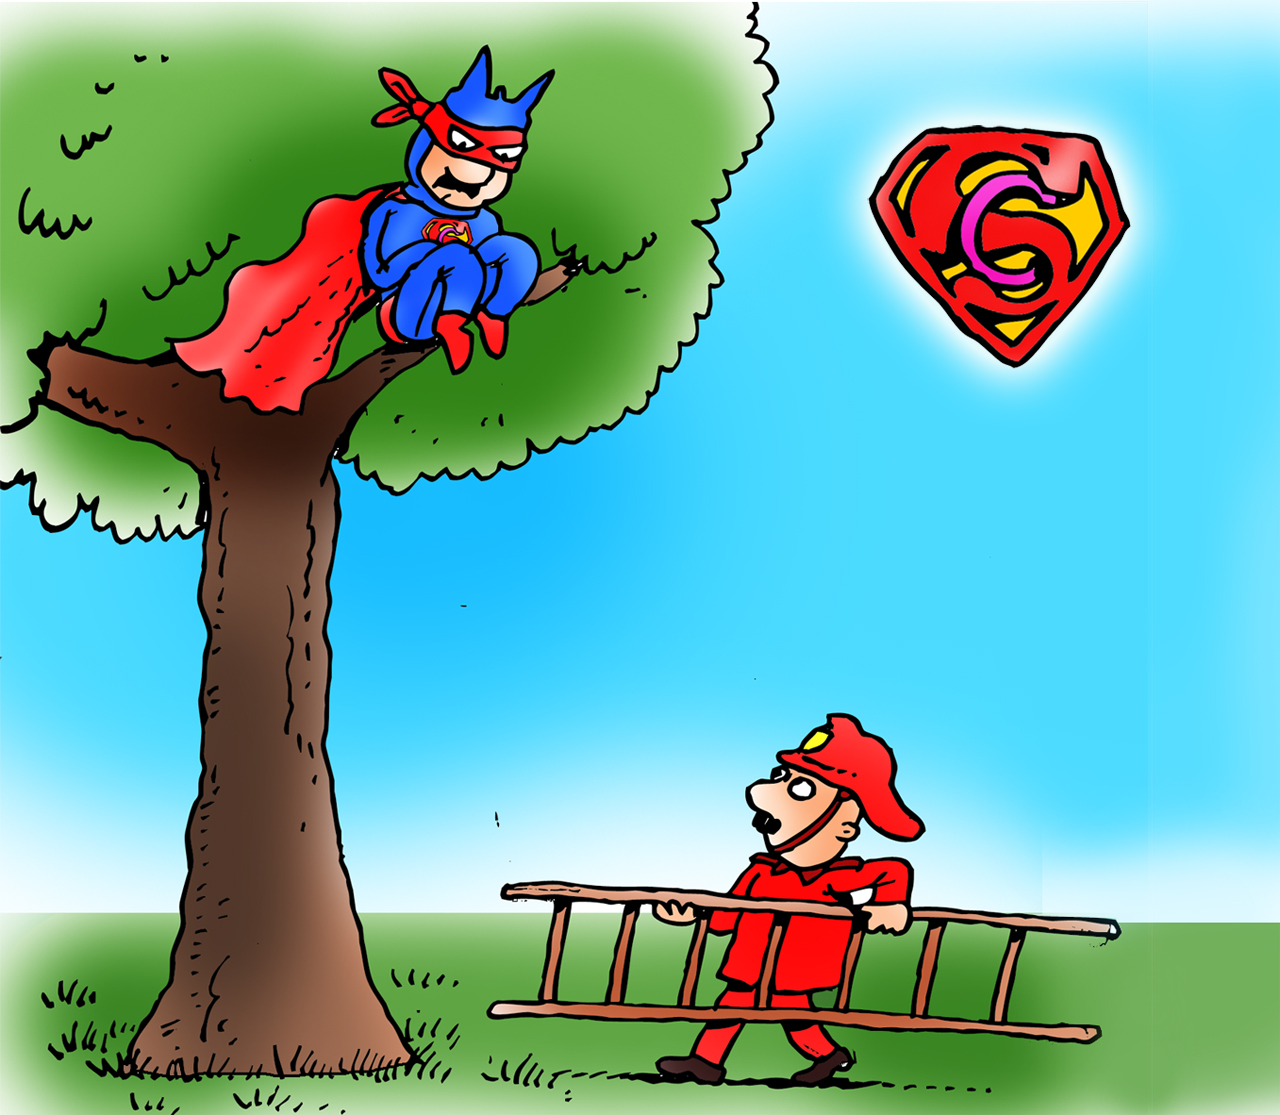 SuperCostello - The Tomcat Man, in a tree